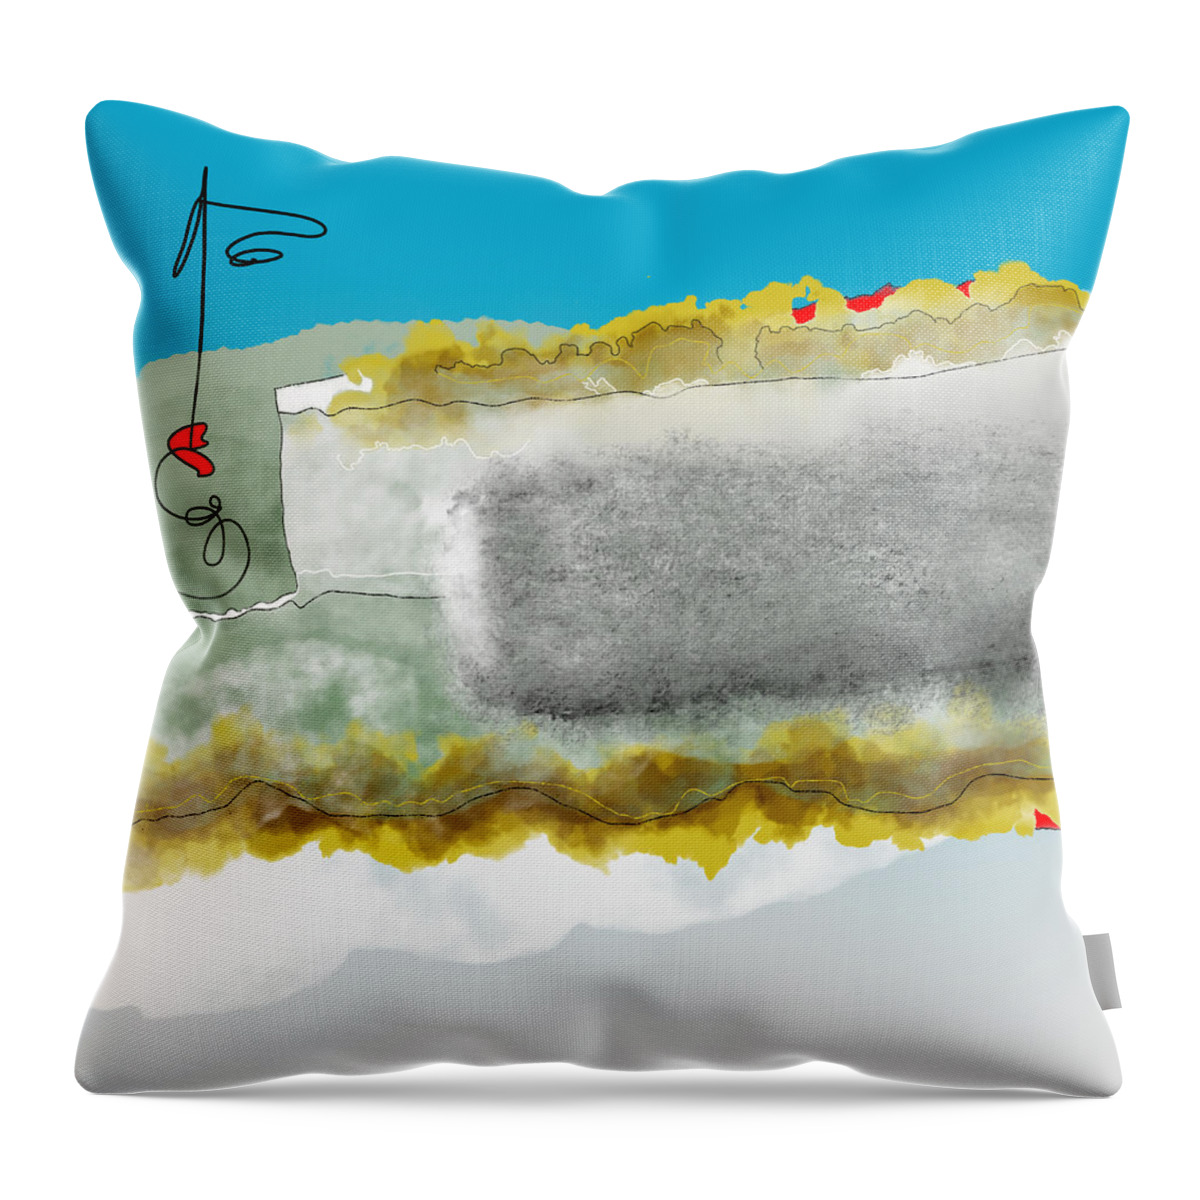  Throw Pillow featuring the digital art Jaded Valentine by Amber Lasche